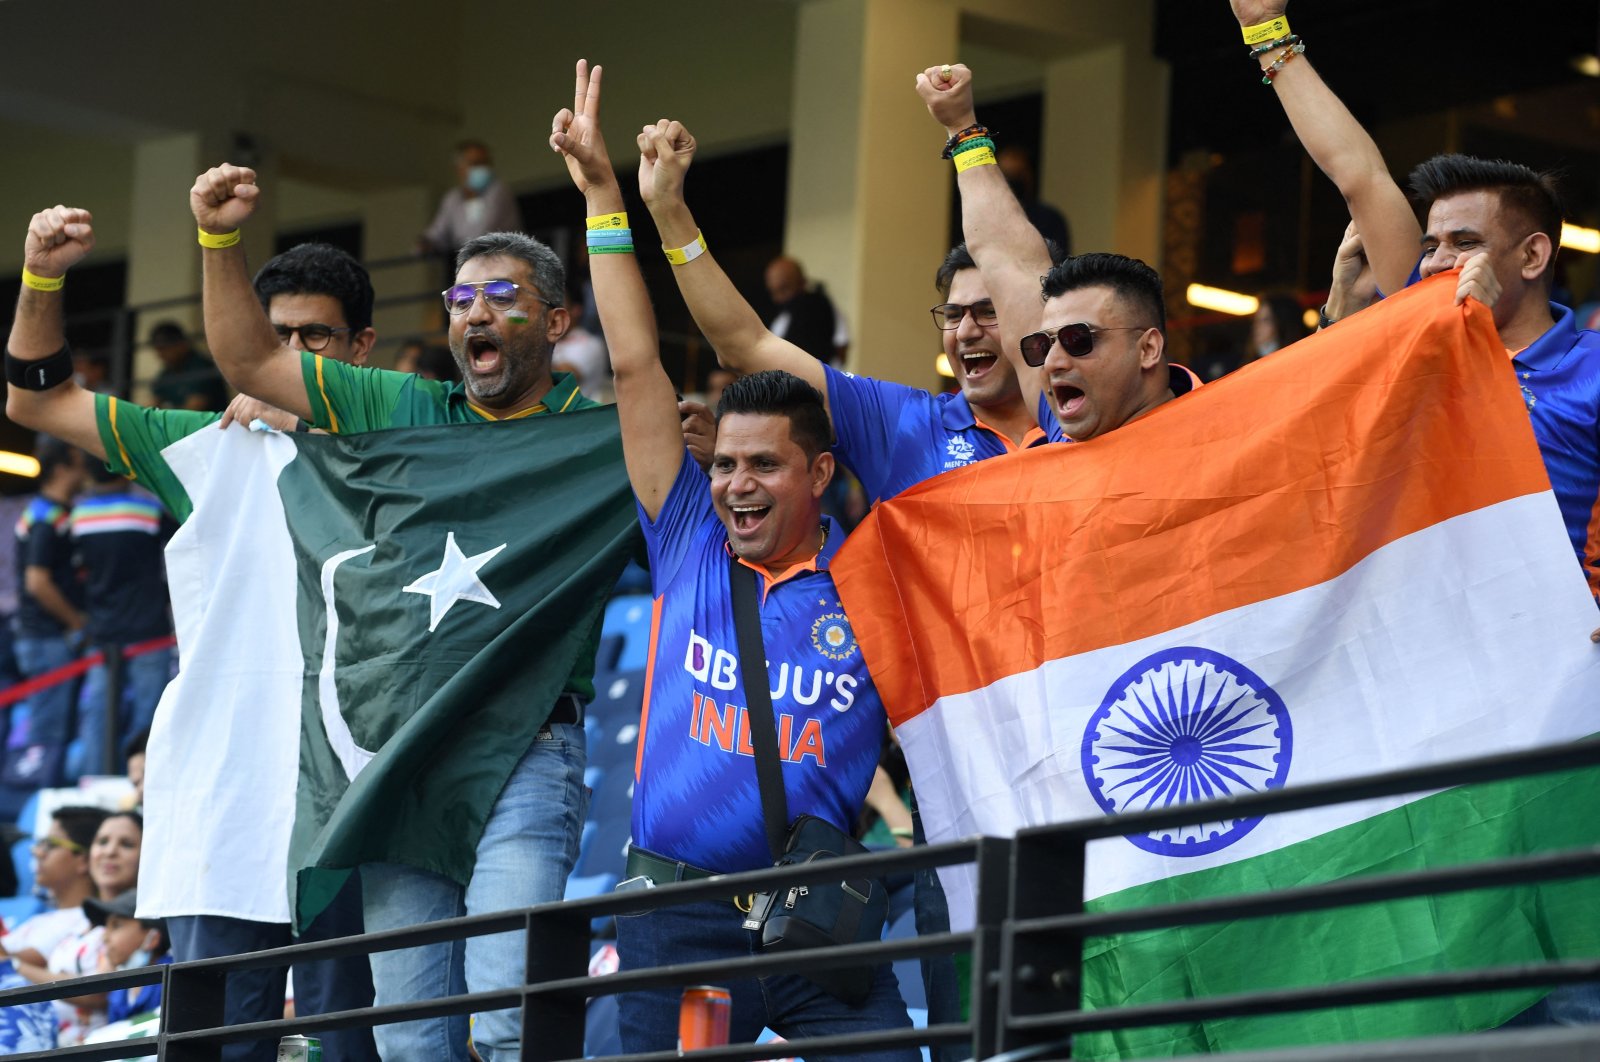 Fans of Pakistan&#039;s and Indian cricket teams cheer before the start of the ICC men’s Twenty20 World Cup match in Dubai, United Arab Emirates, Oct. 24, 2021. (AFP PHOTO)